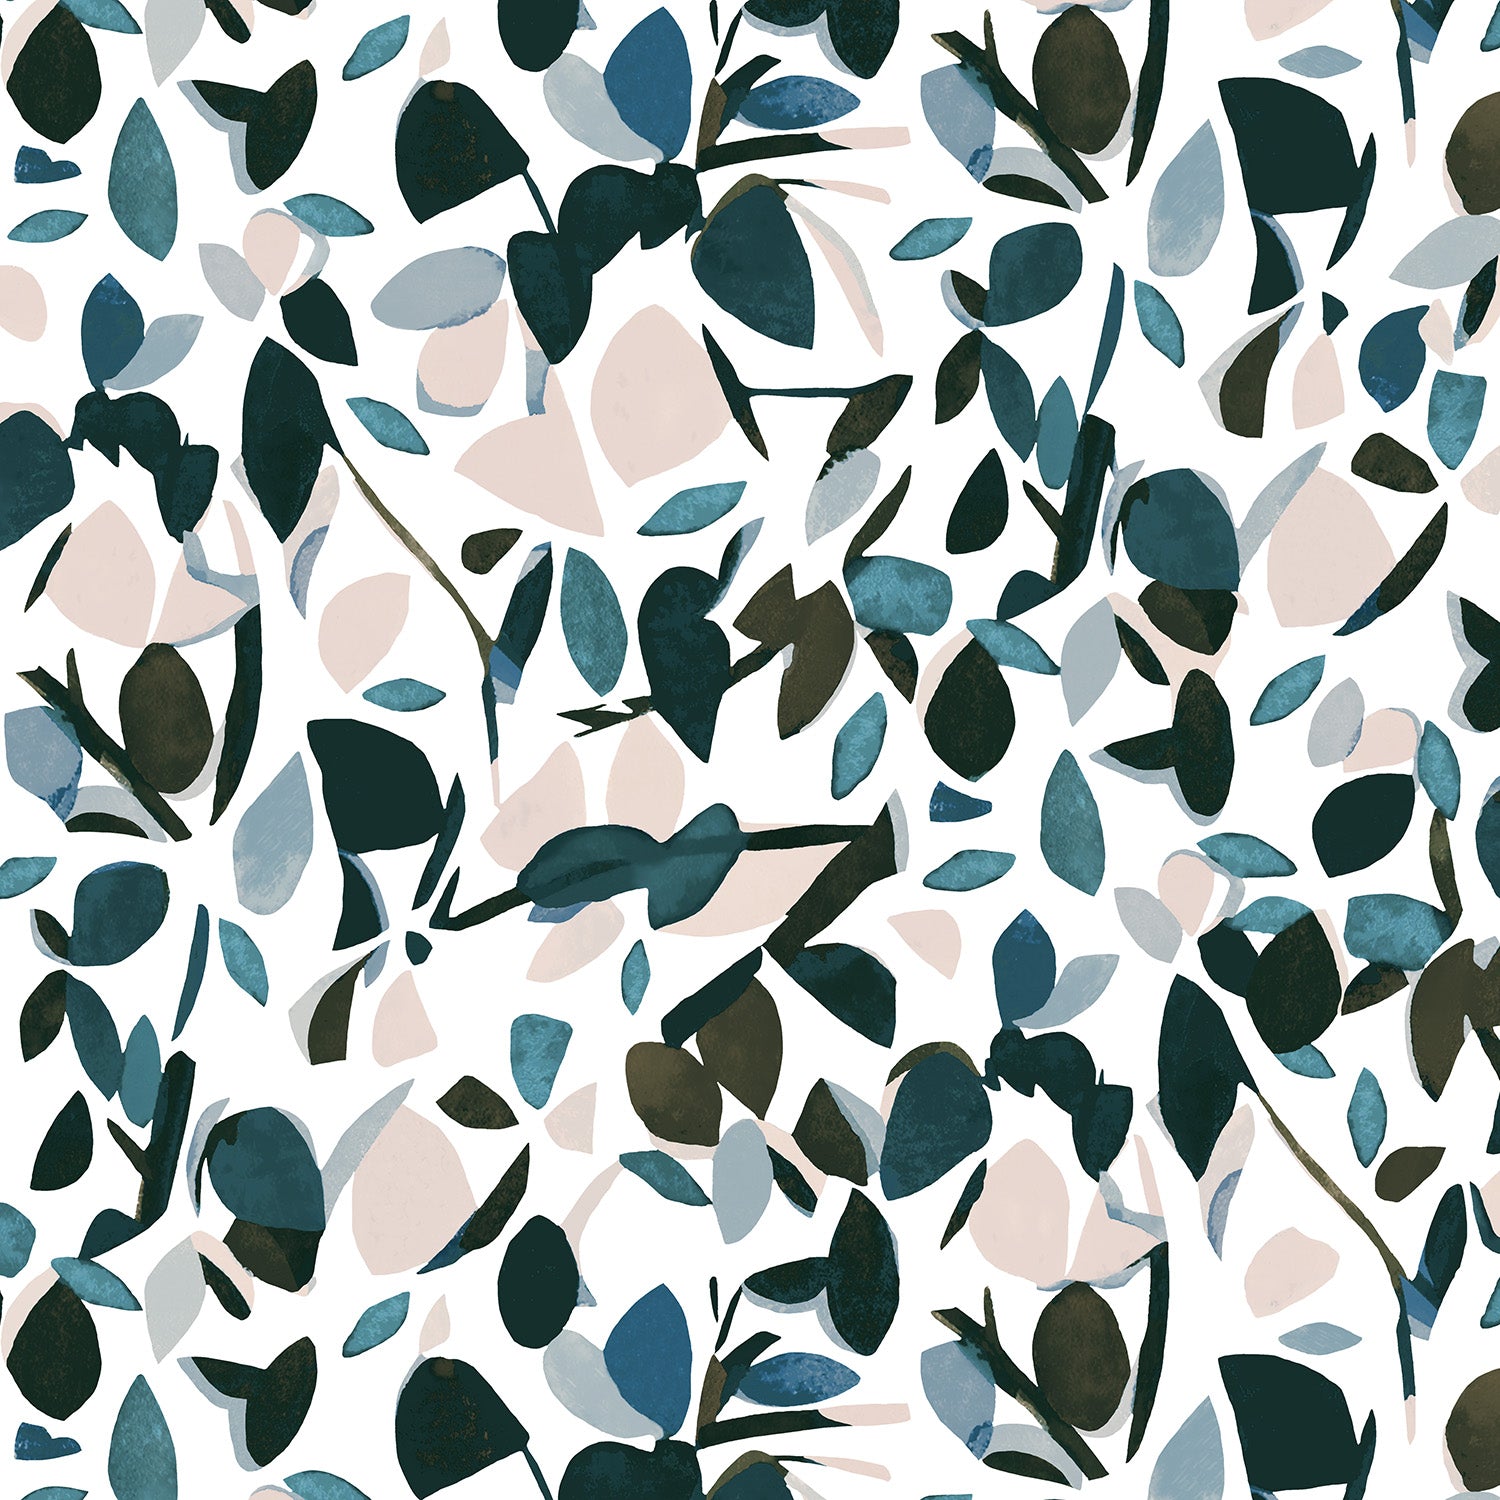 Detail of wallpaper in a minimal leaf print in shades of pink, turquoise and gray on a white field.